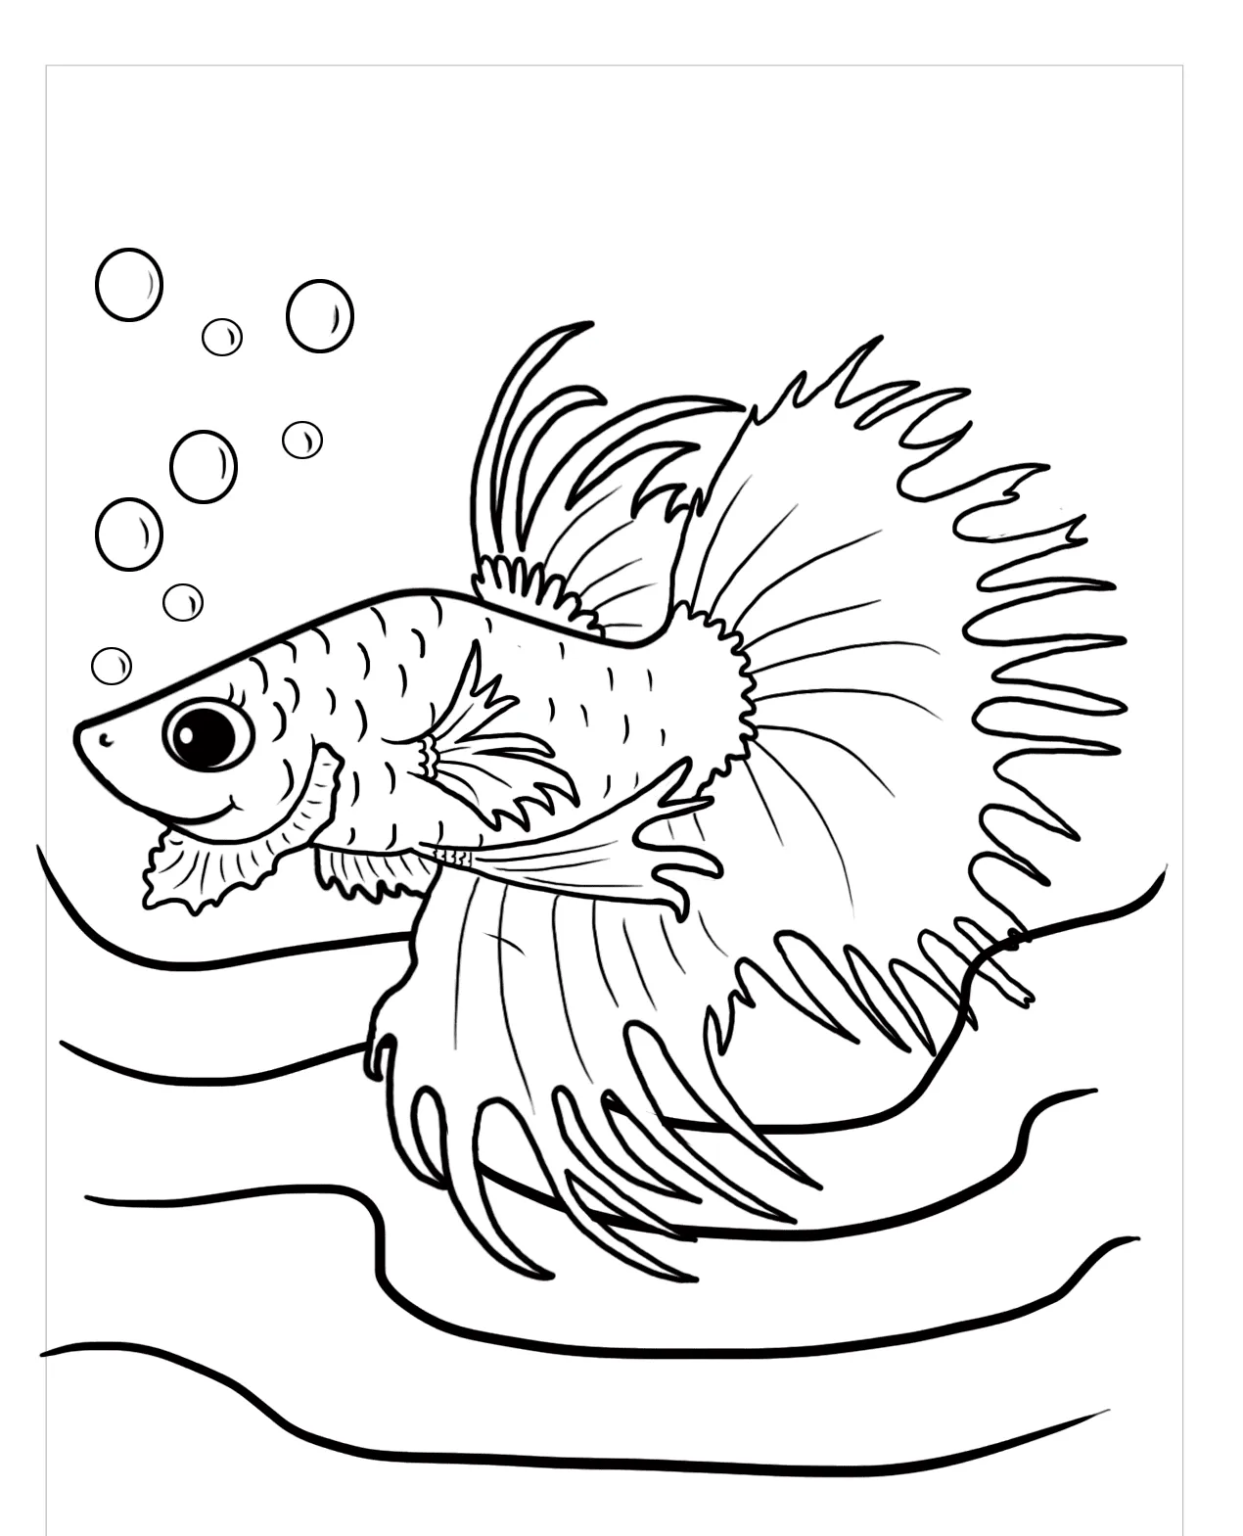 Get Creative with Betta Fish Coloring Pages | GBcoloring